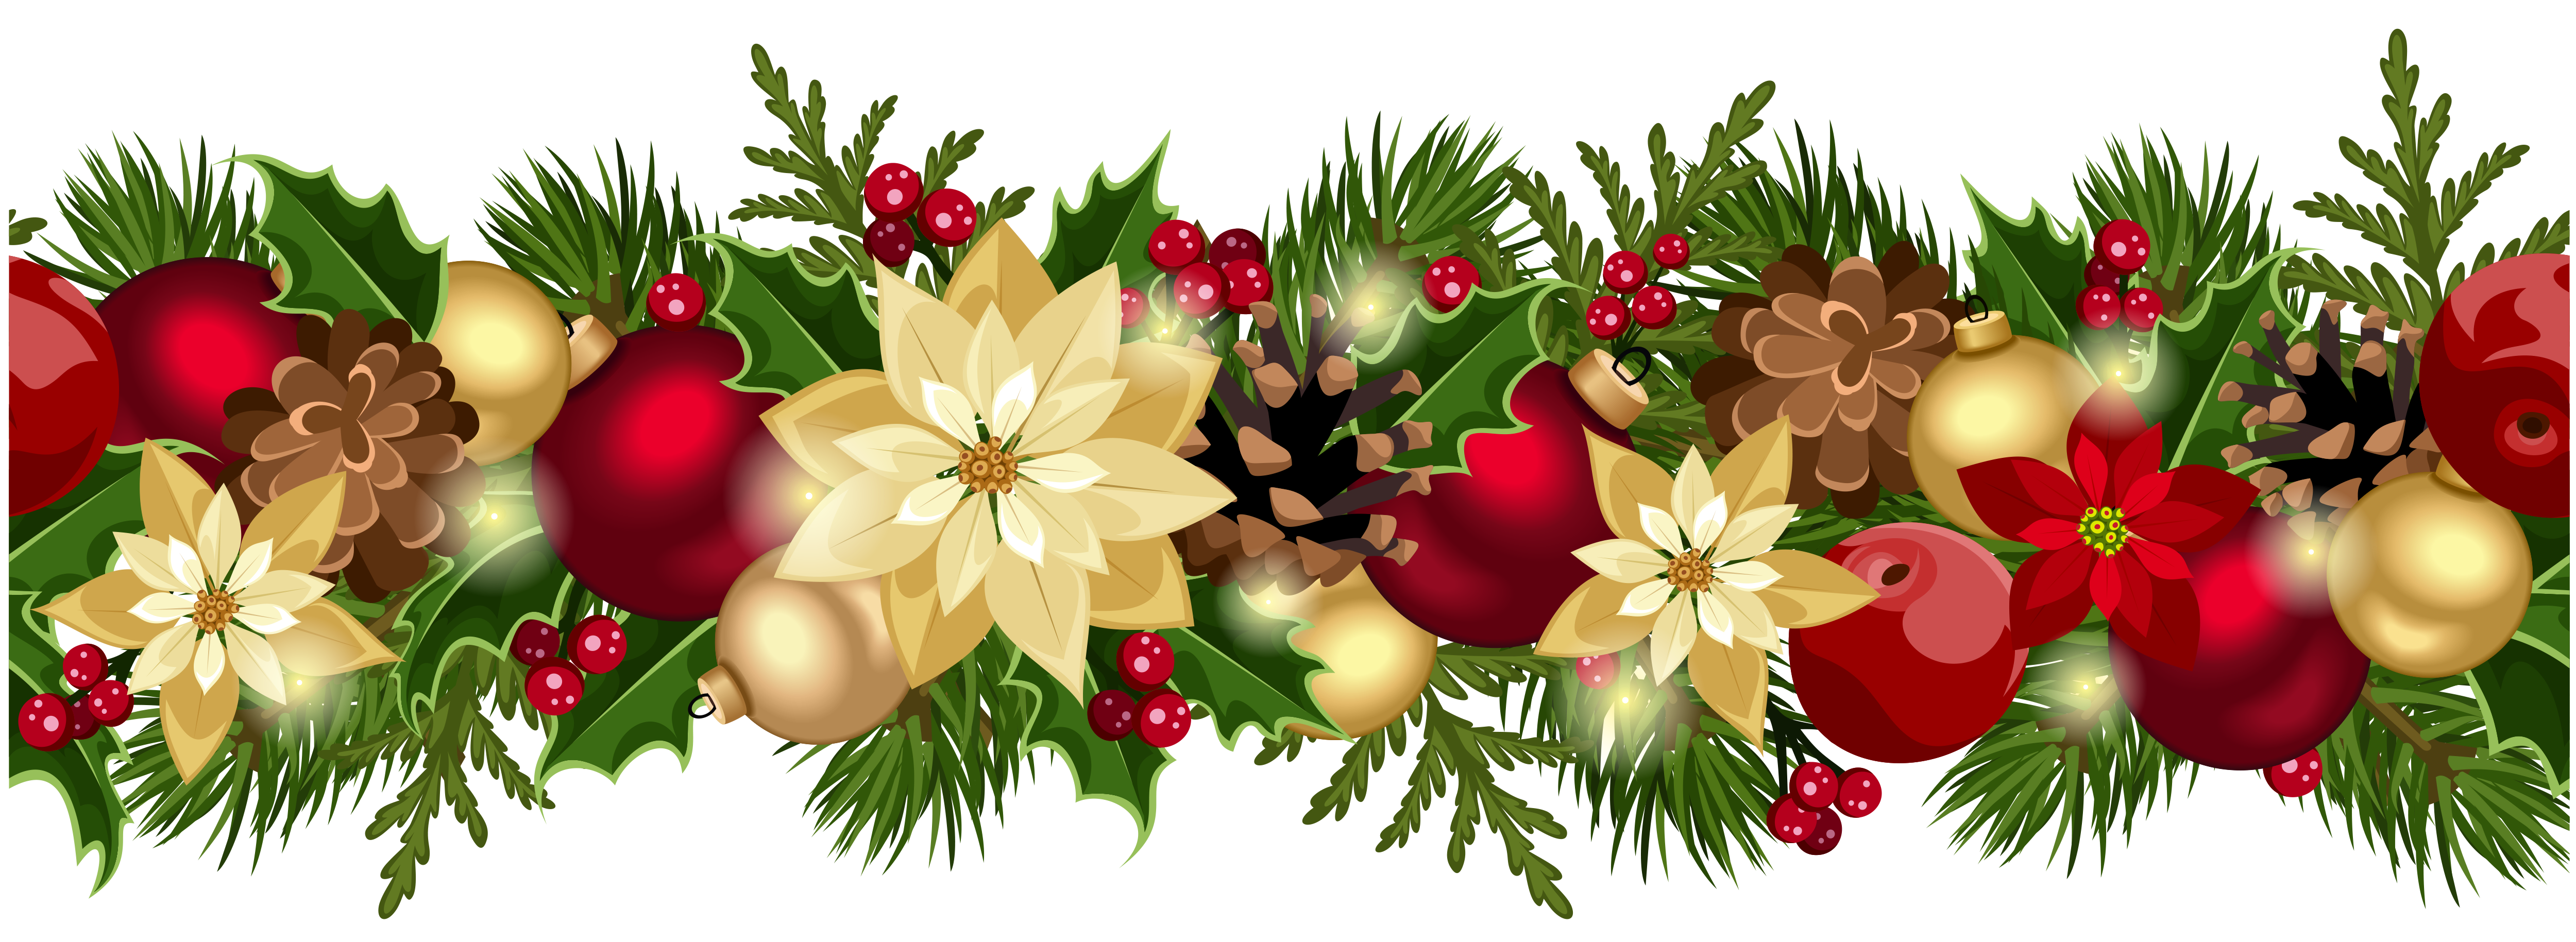 Holiday crafthubs background cover. Garland clipart bauble